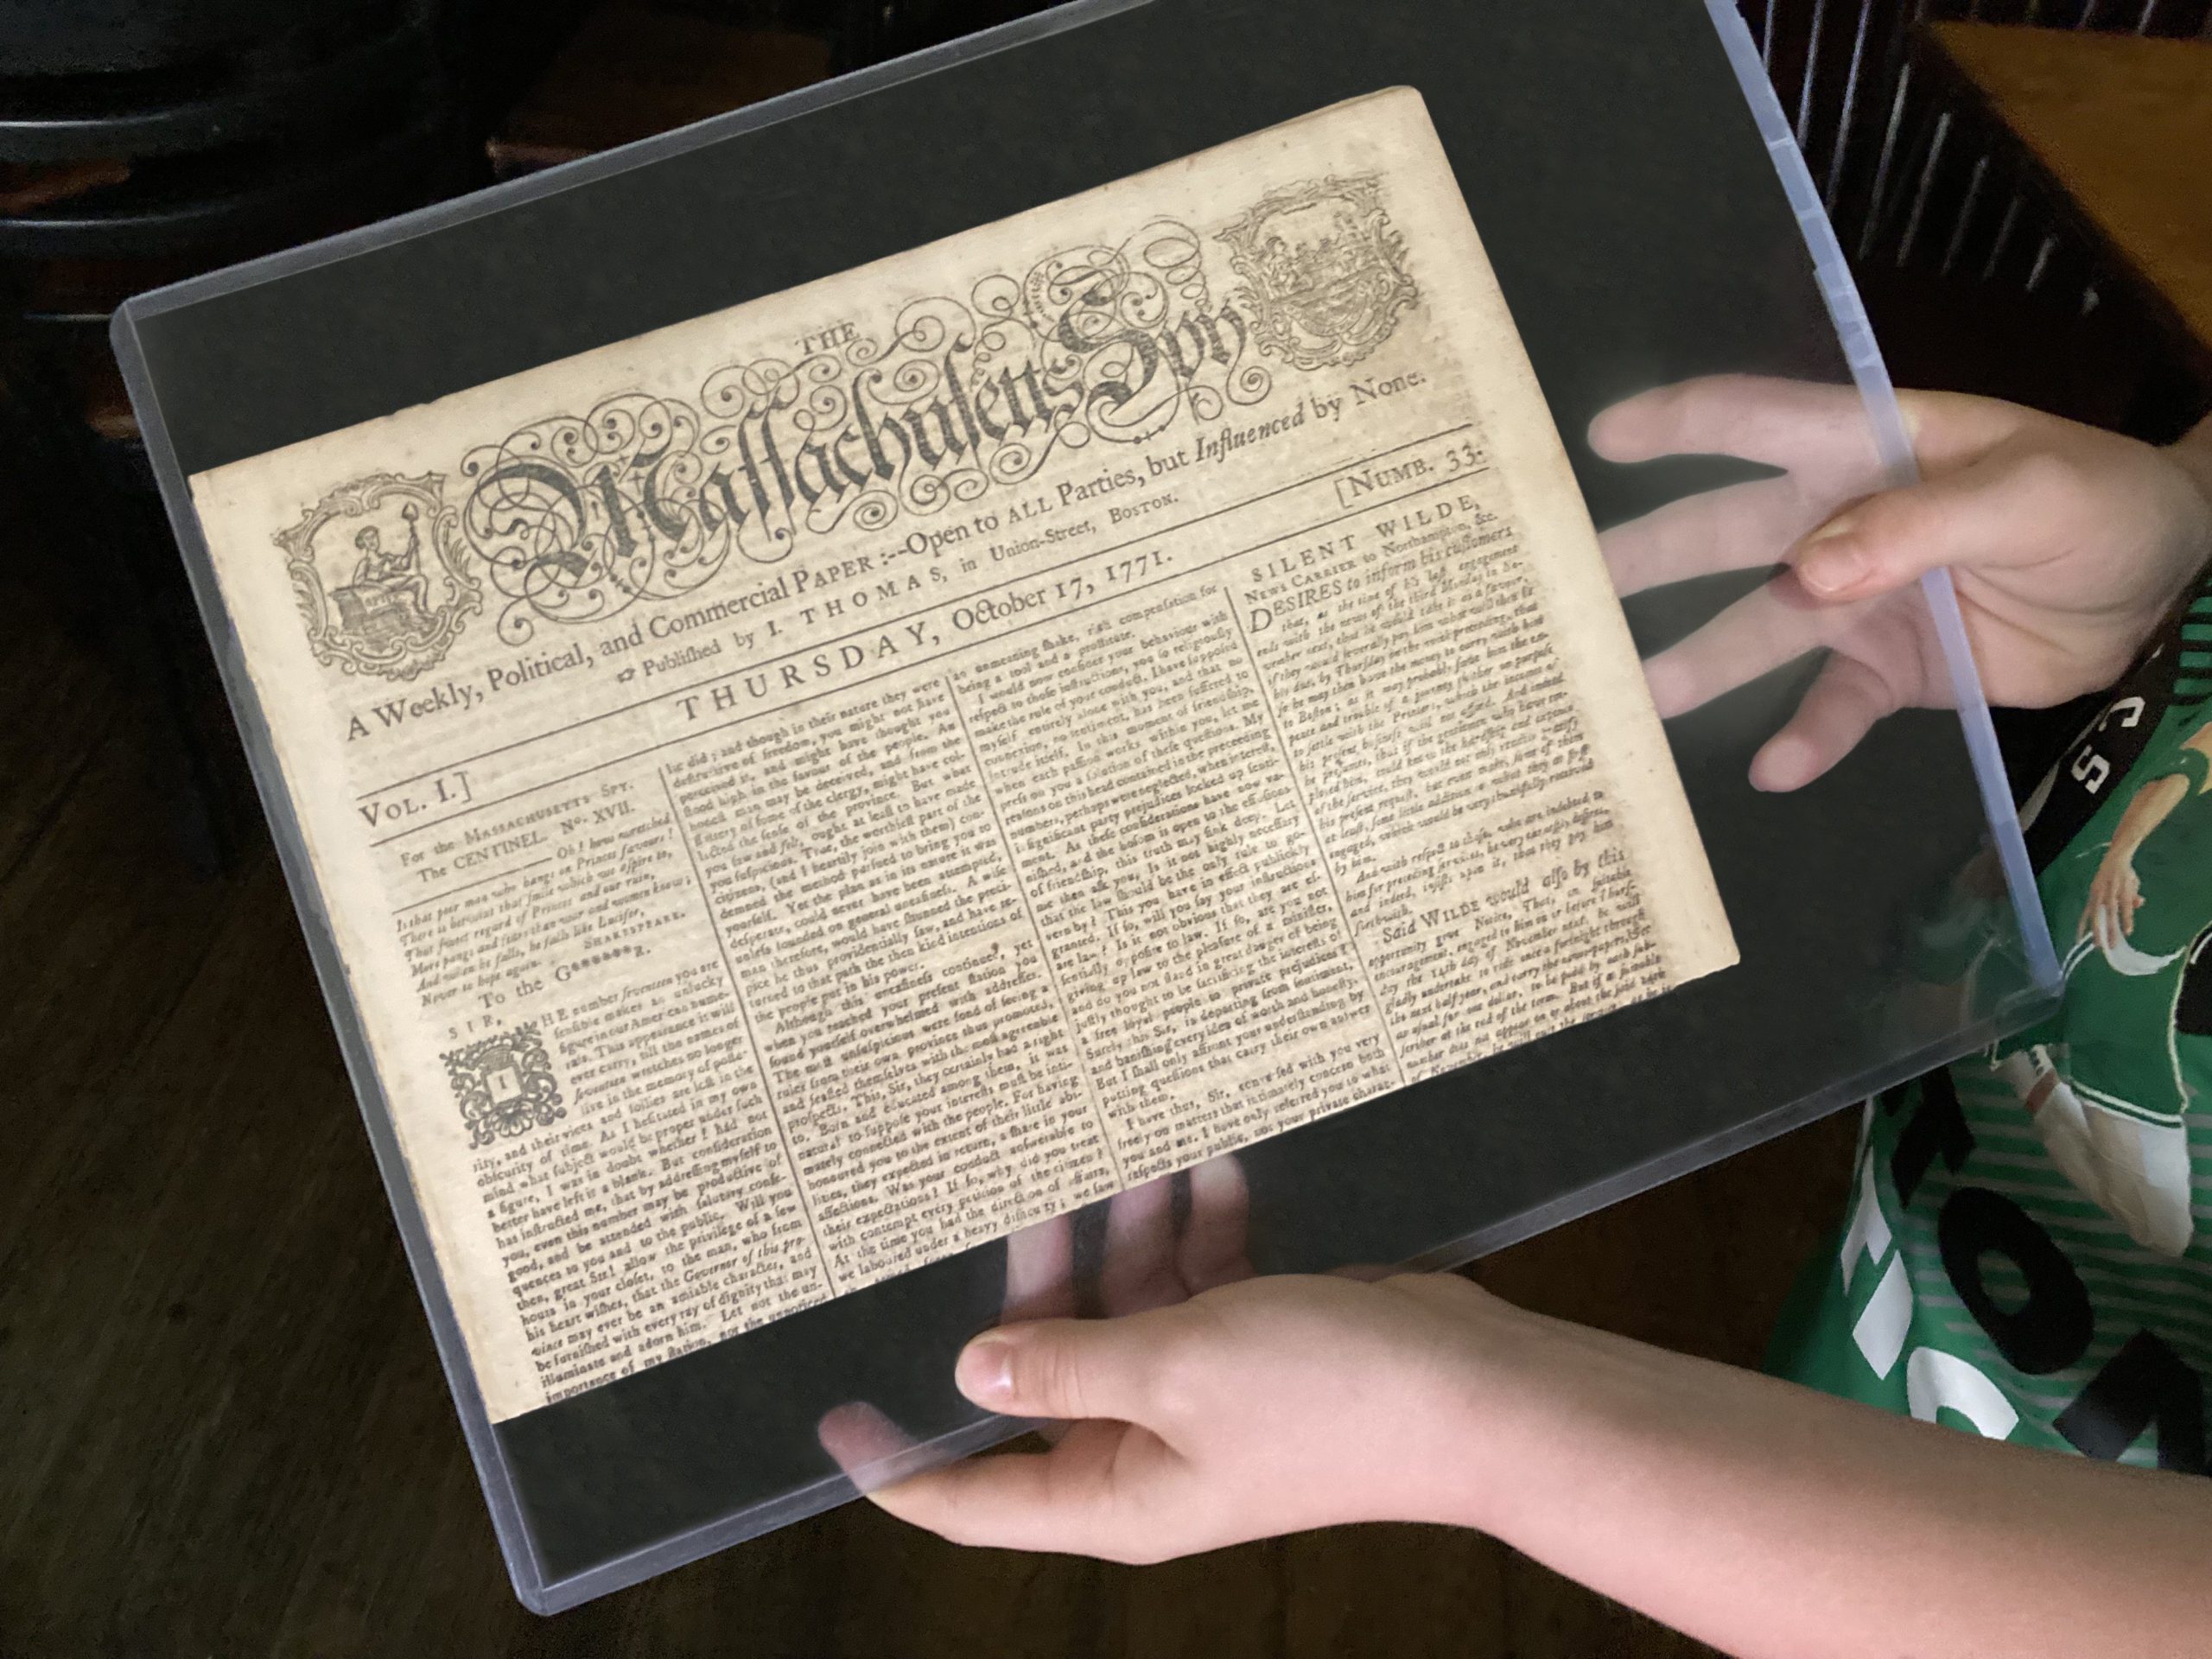 The October 17, 1771 issue of the Massachusetts Spy printed by Isaiah Thomas